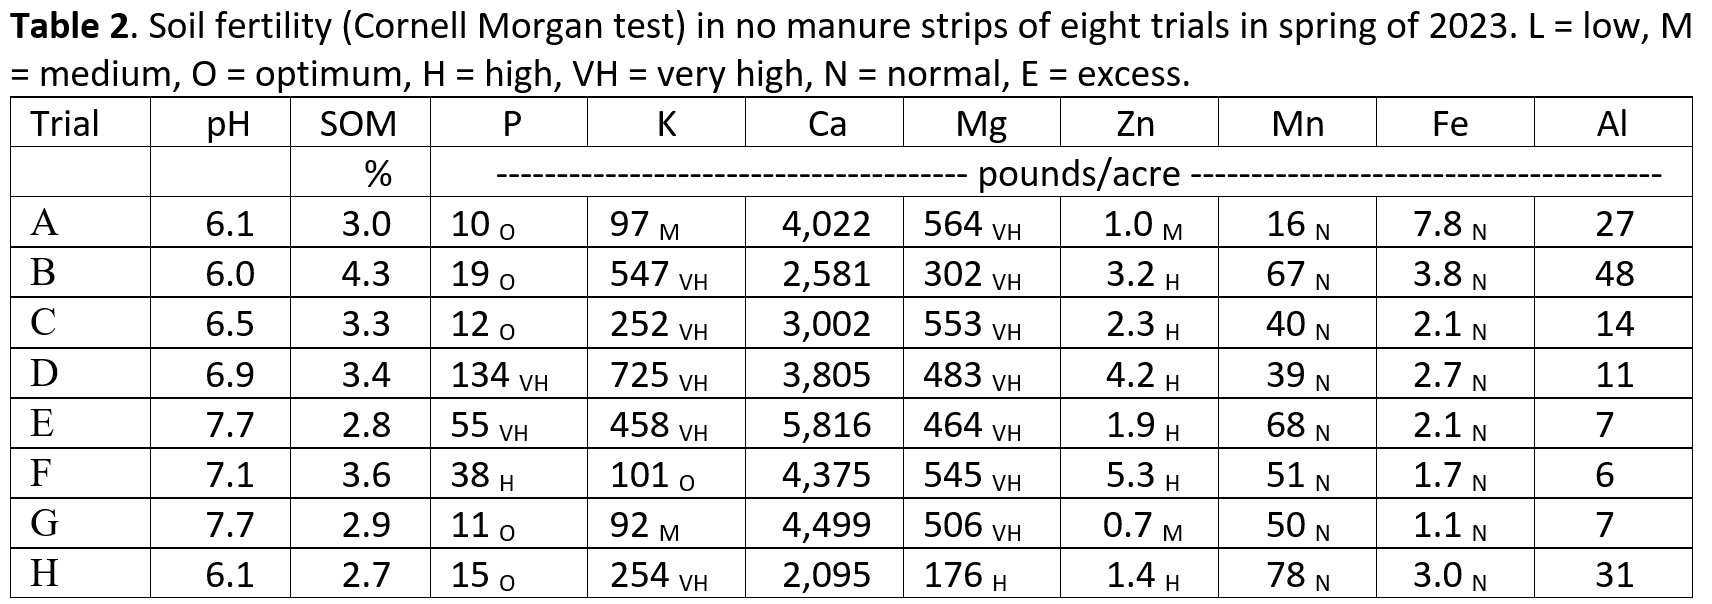 Table describing the results of the Cornell Morgan test.